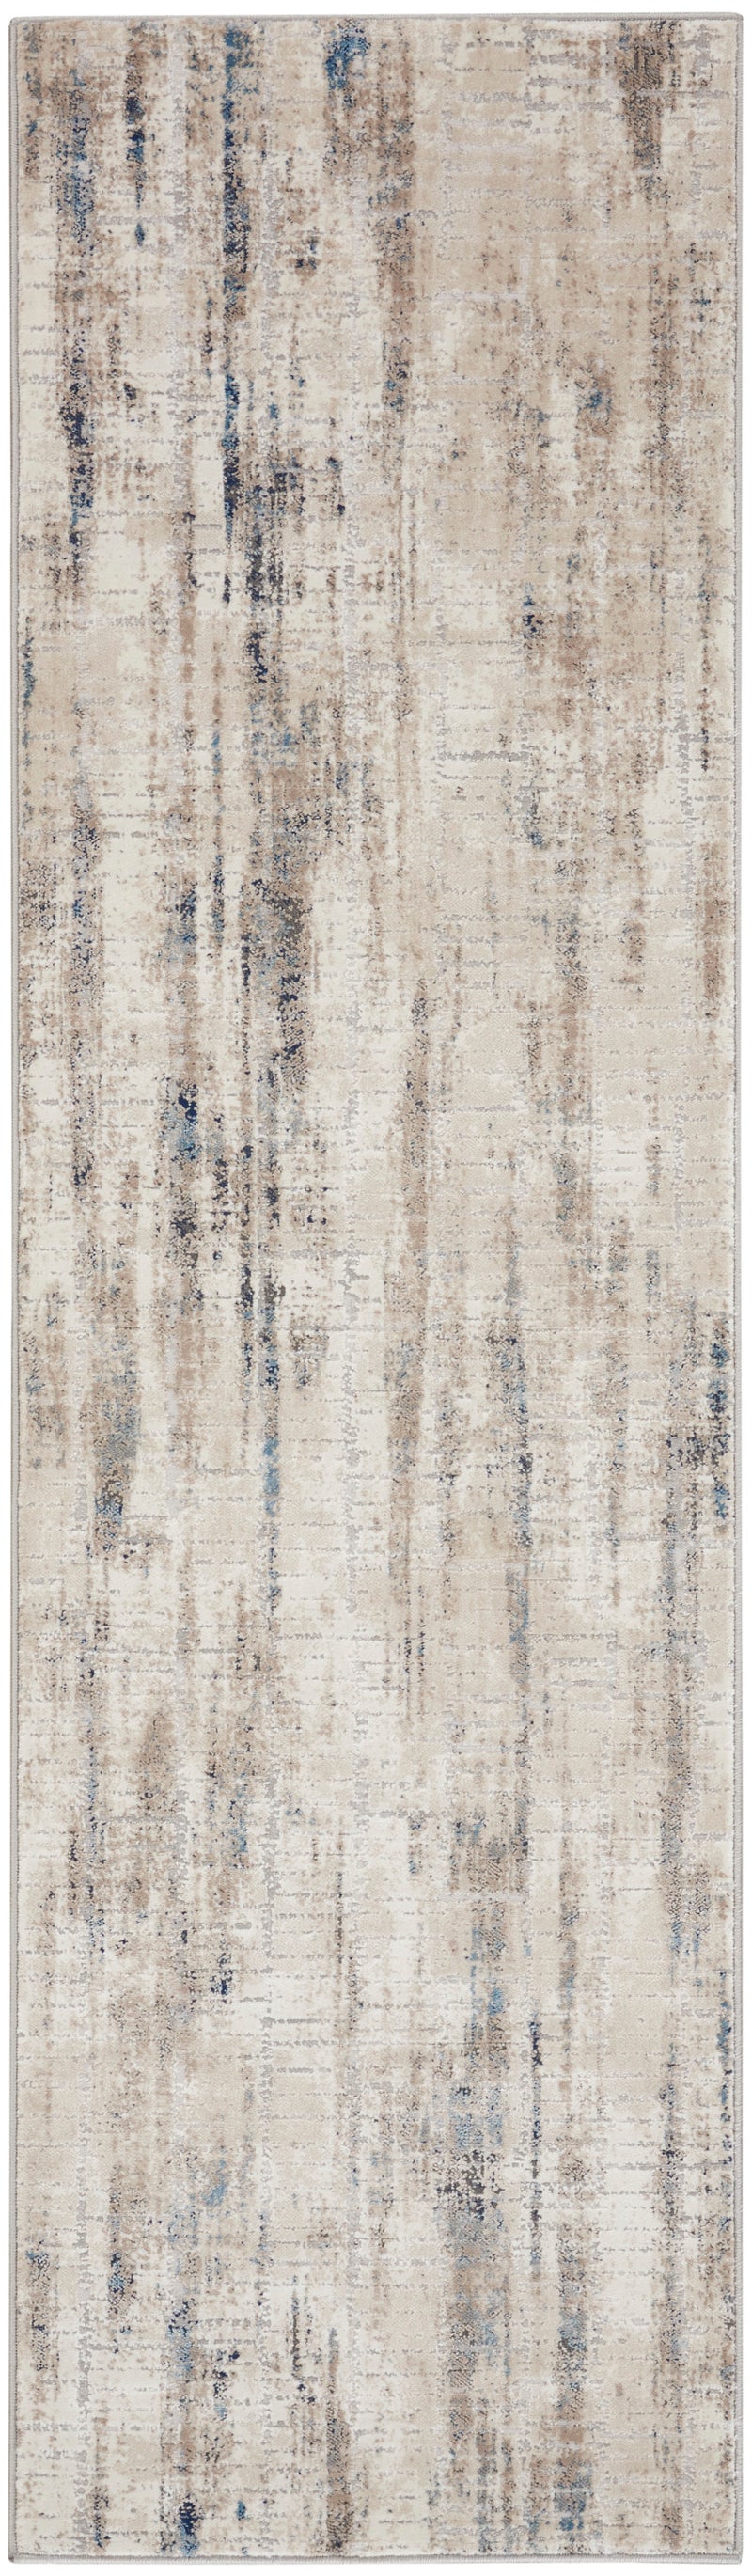 media image for ck022 infinity ivory grey blue rug by nourison 99446079107 redo 6 234